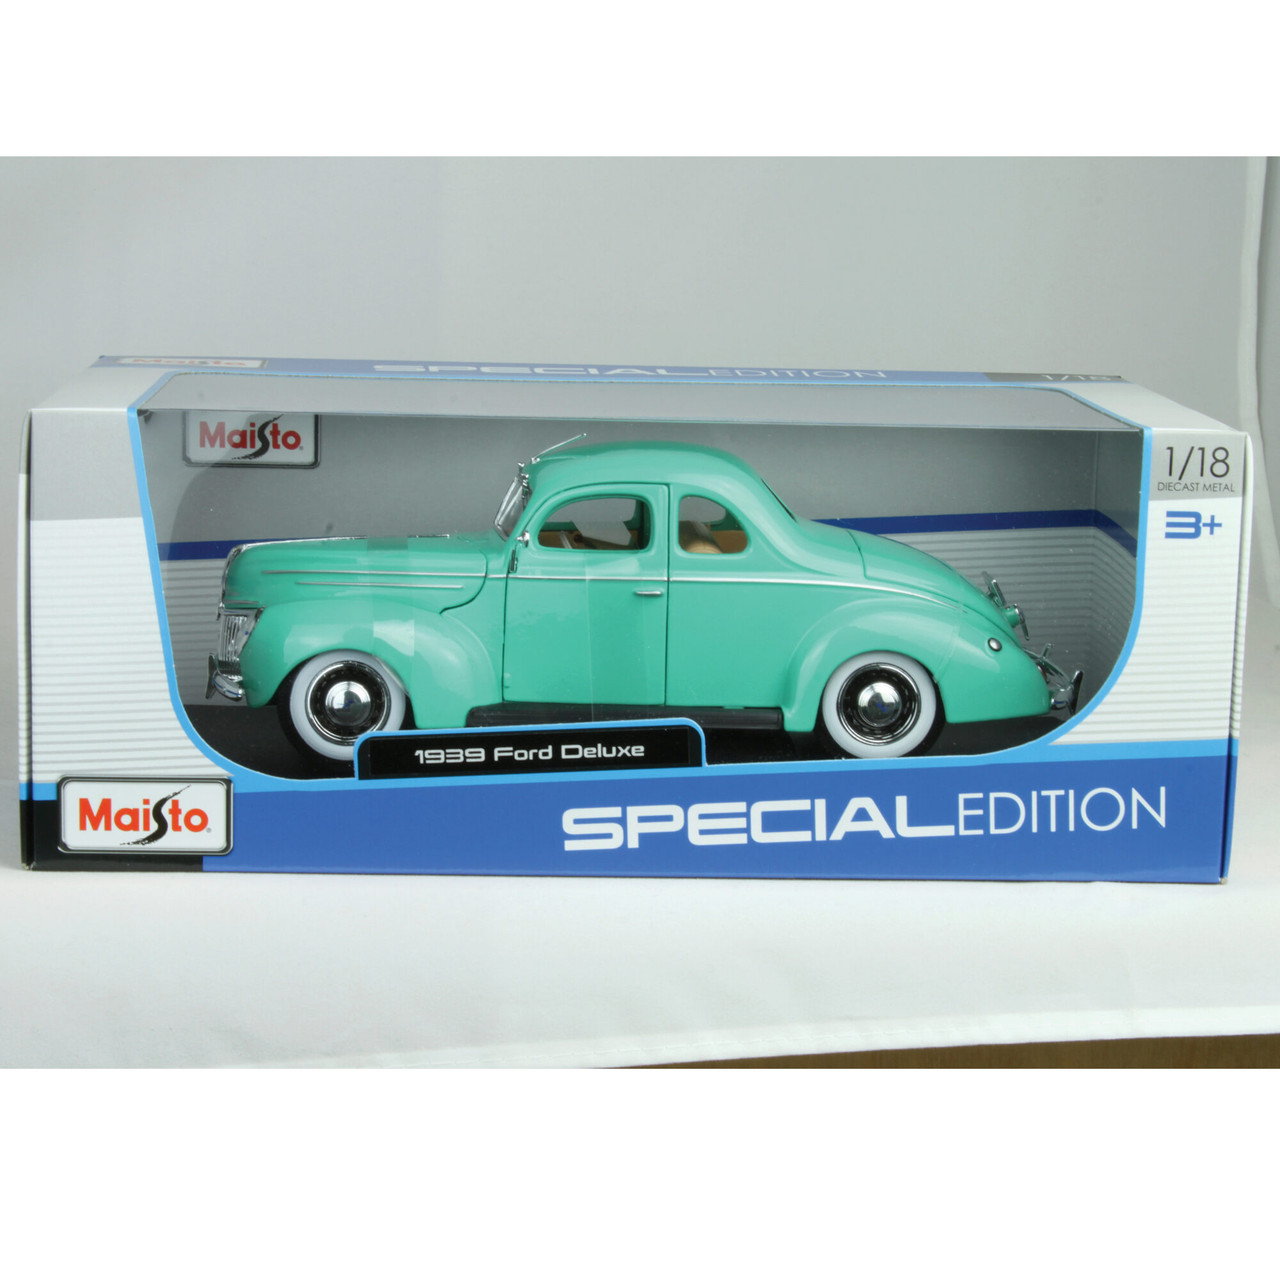 1939 Ford Coupe 1:18 Scale Diecast Model Car by Maisto